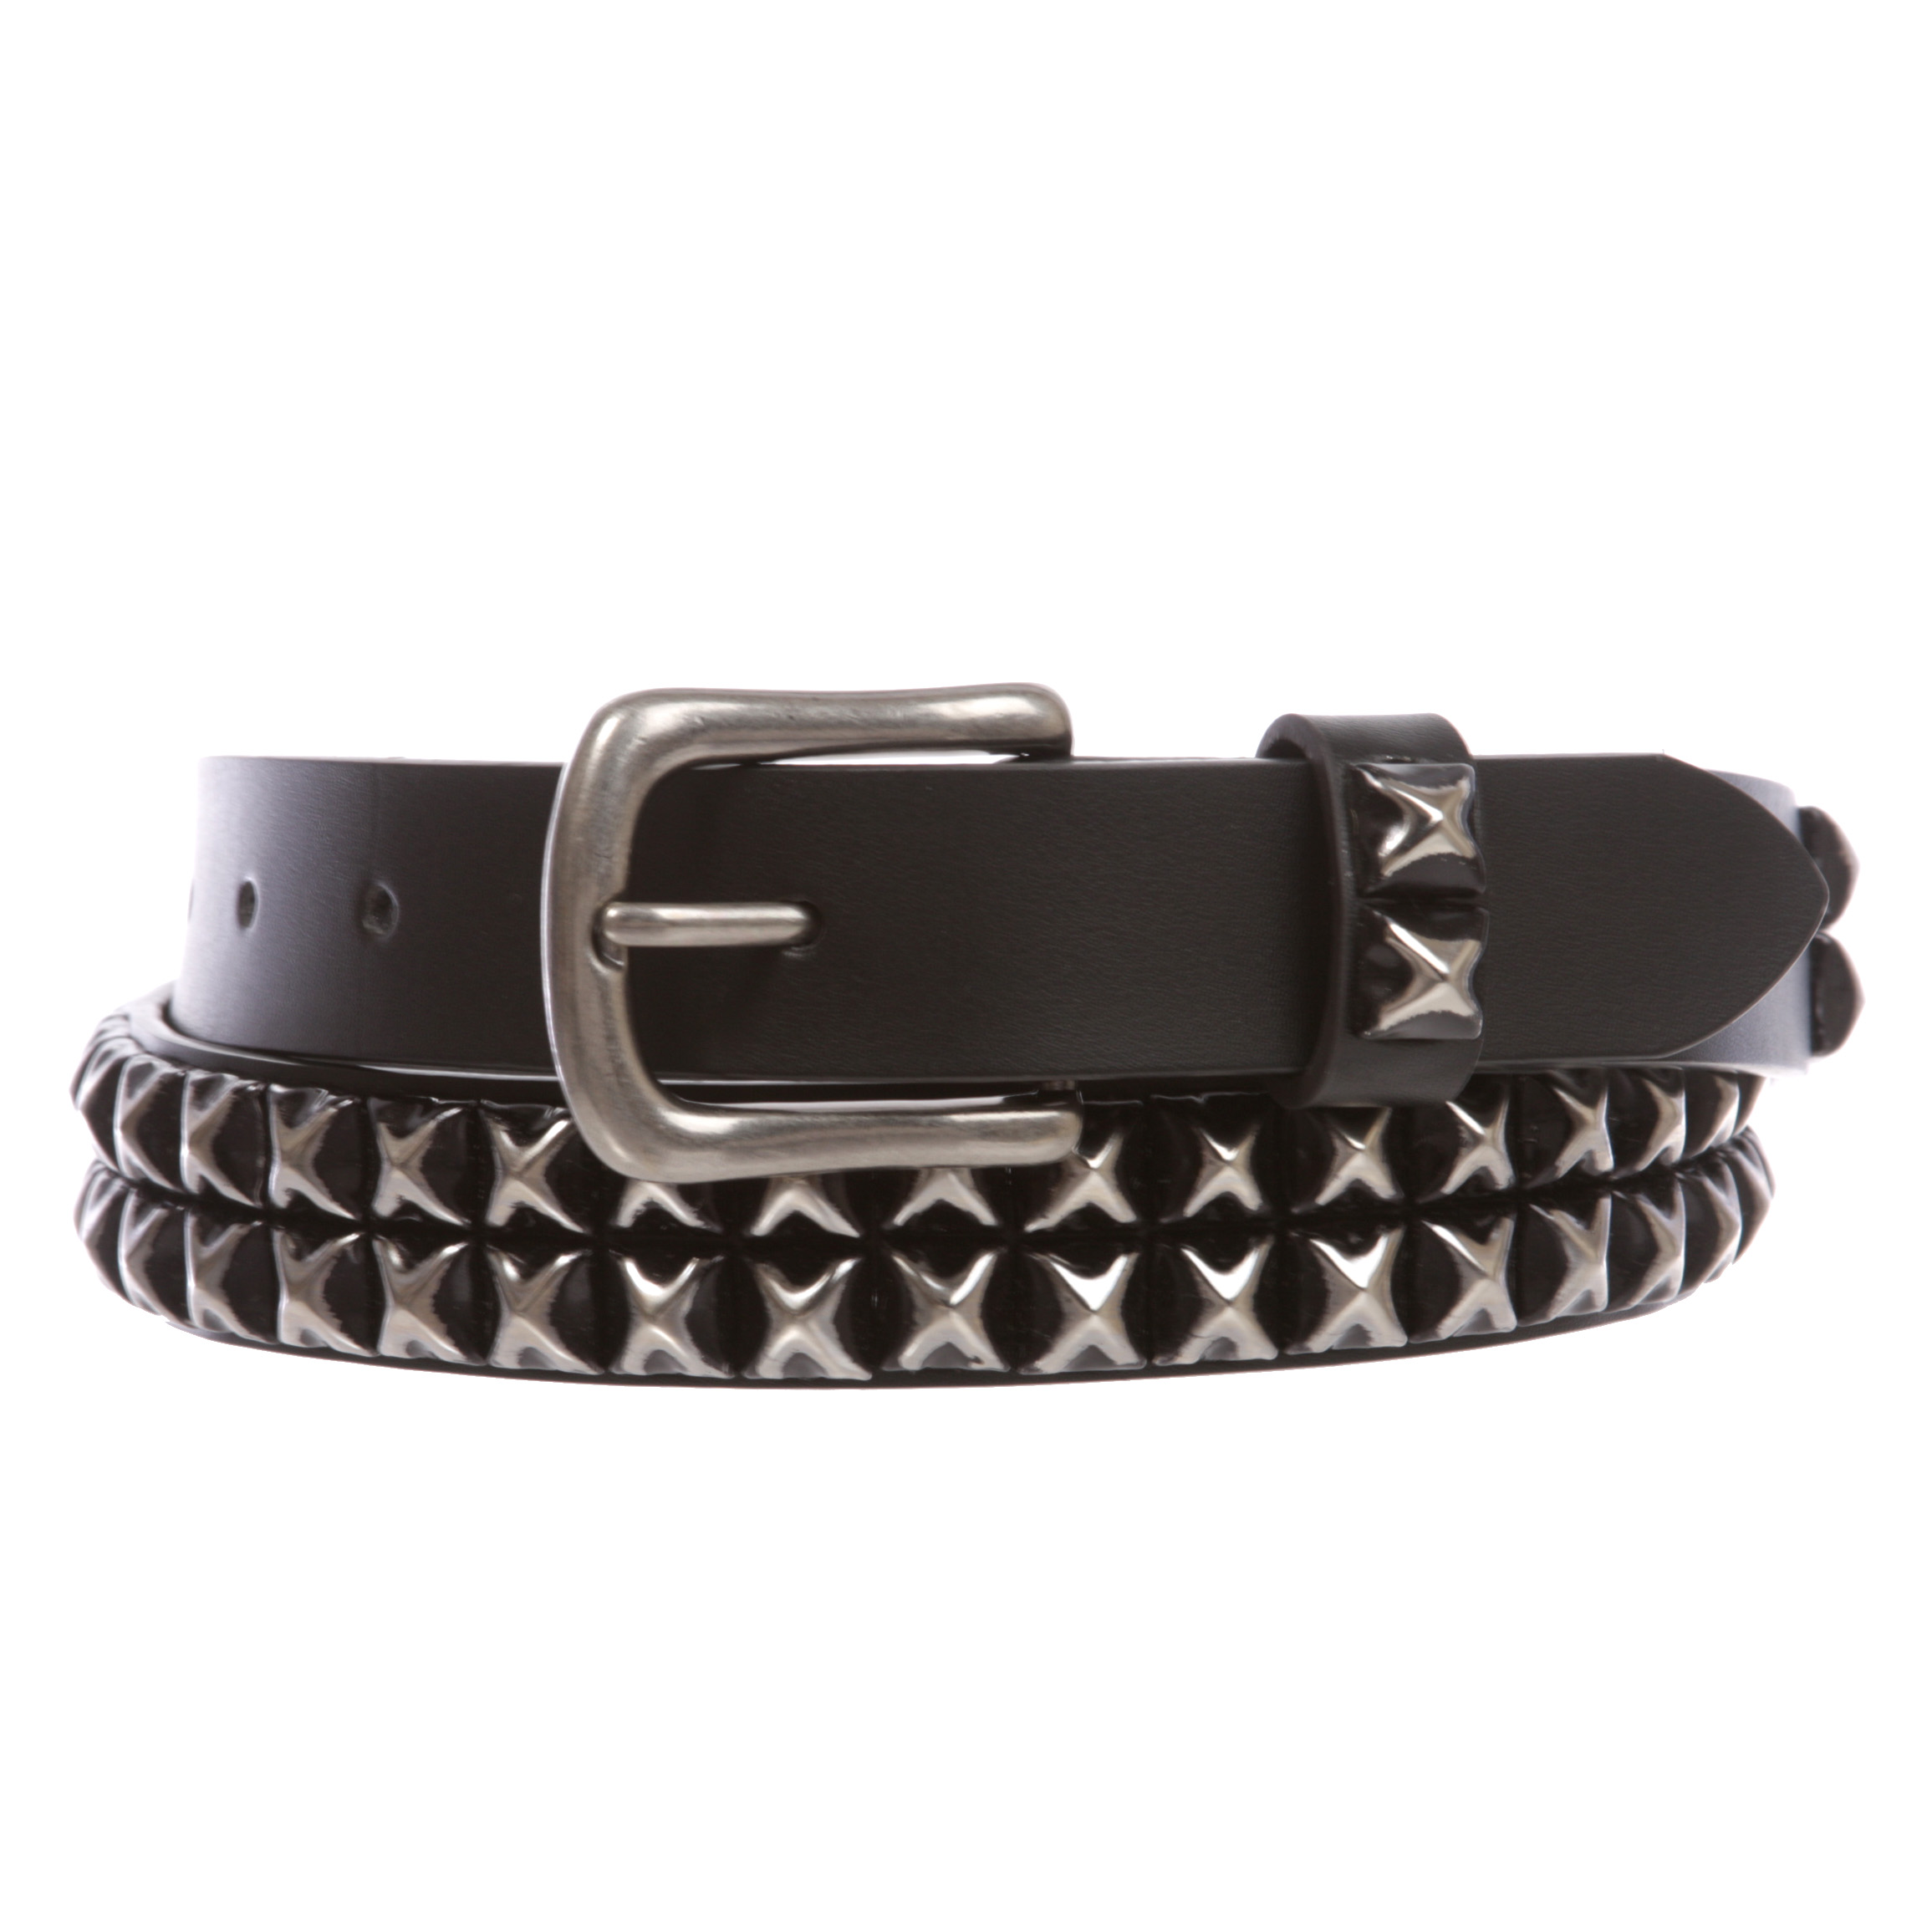 Snap On Two Row Punk Rock Star Distressed Black Studded Leather Belt - image 1 of 5